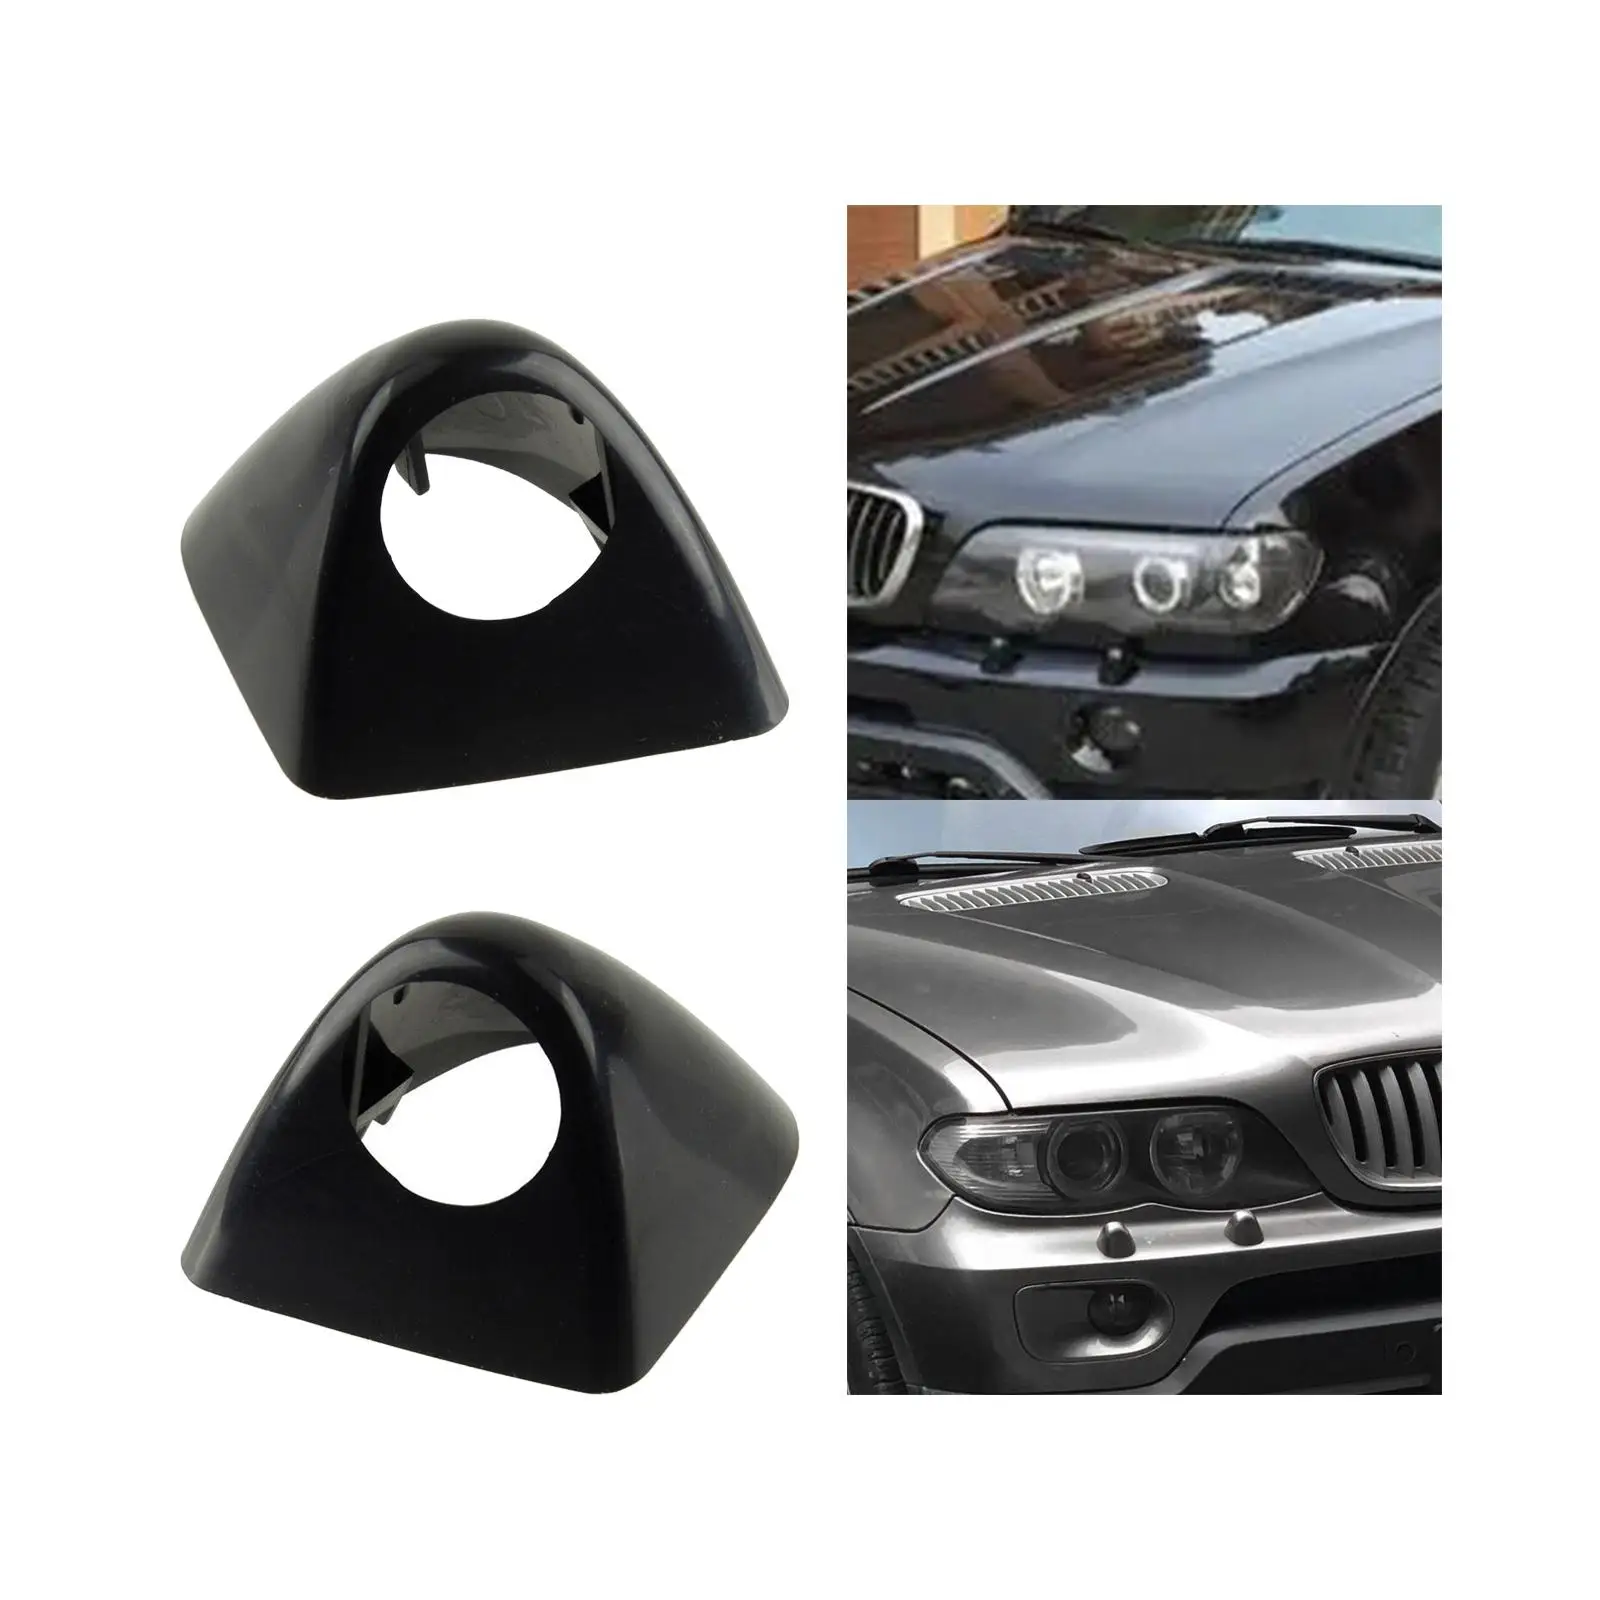 Replacement Headlight Washer Cover Sturdy for bmw E53 x5 Accessories